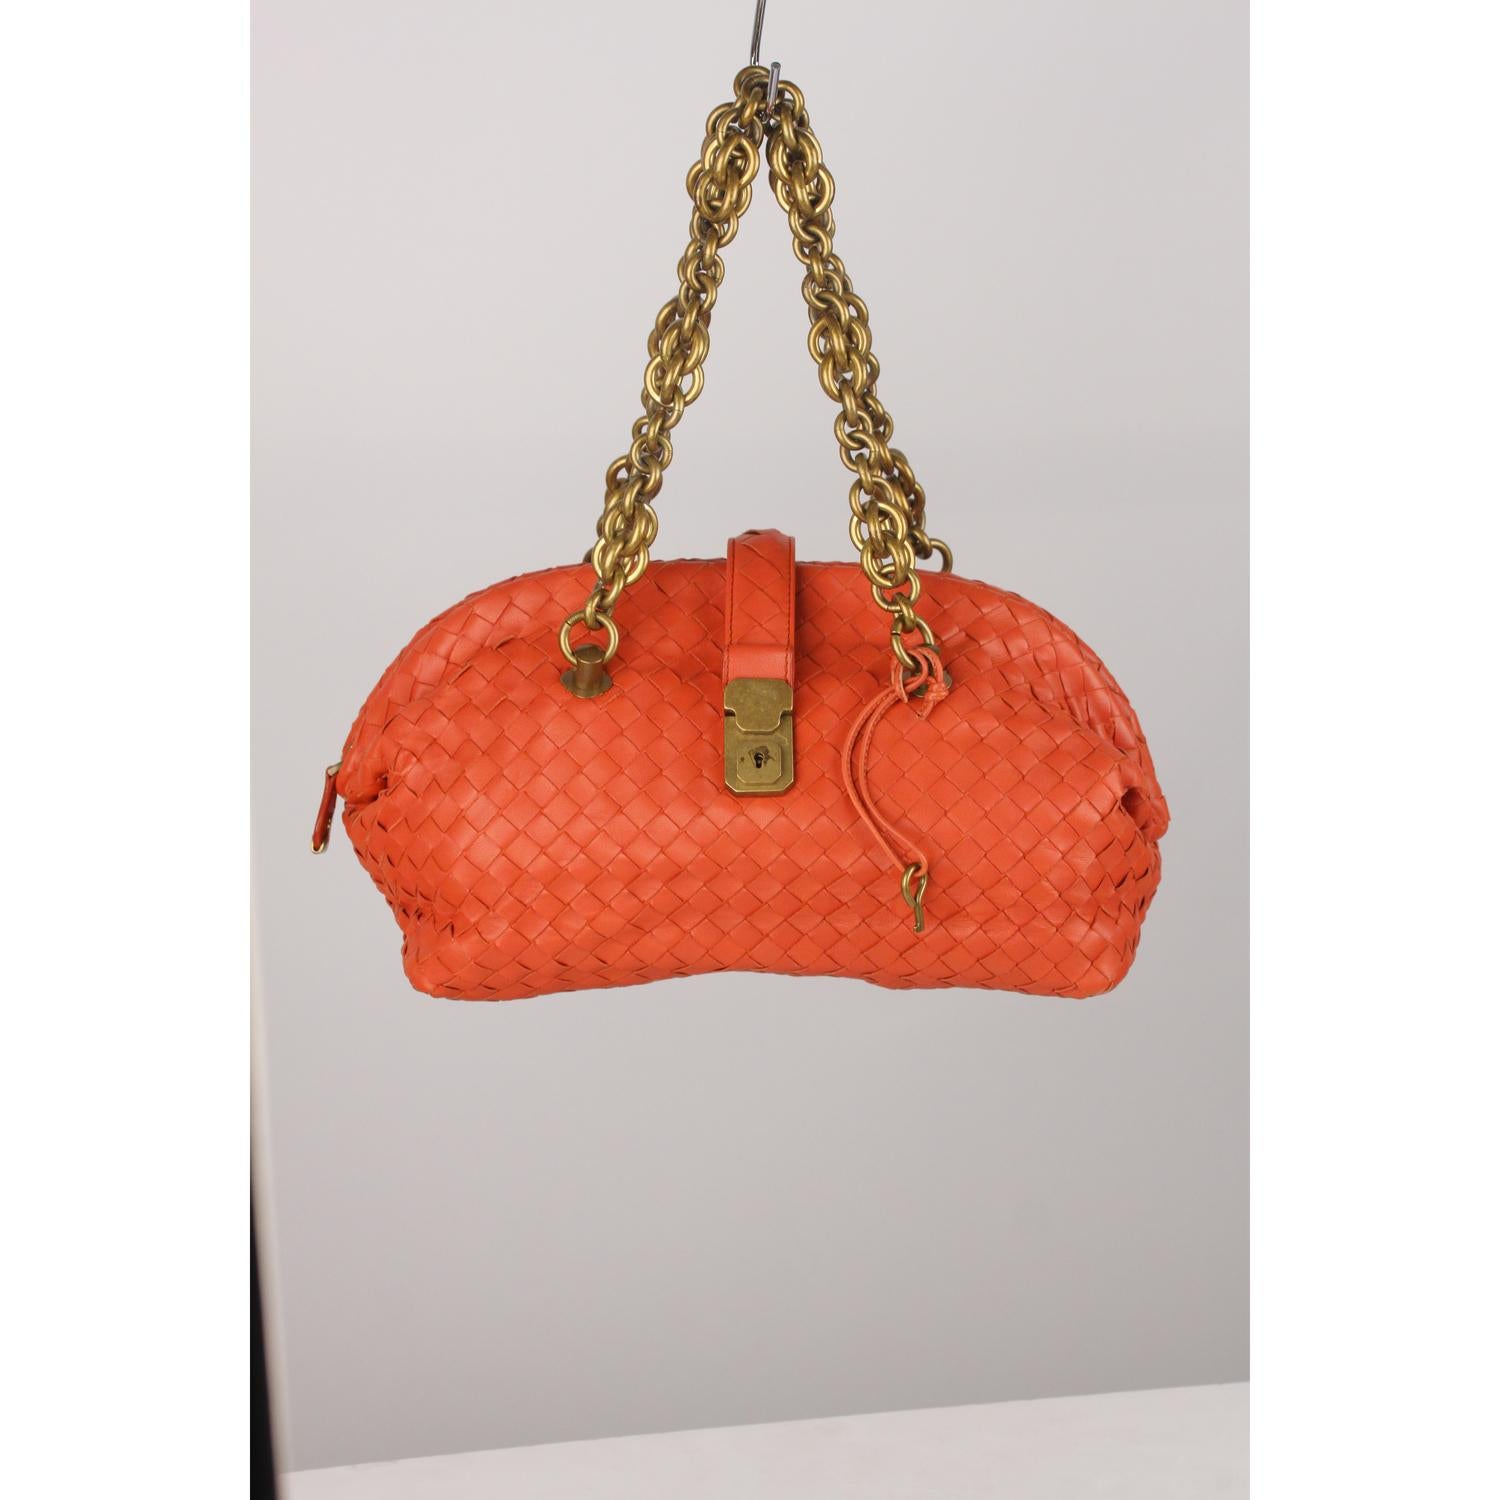 BOTTEGA VENETA Intrecciato woven Bowler bag in orange color. Upper zipper closure and fold-over strap with front key closure (key is included). Tan suede lining with 1 side zip pocket inside. Chain handles. 'BOTTEGA VENETA - Made in italy' engraved